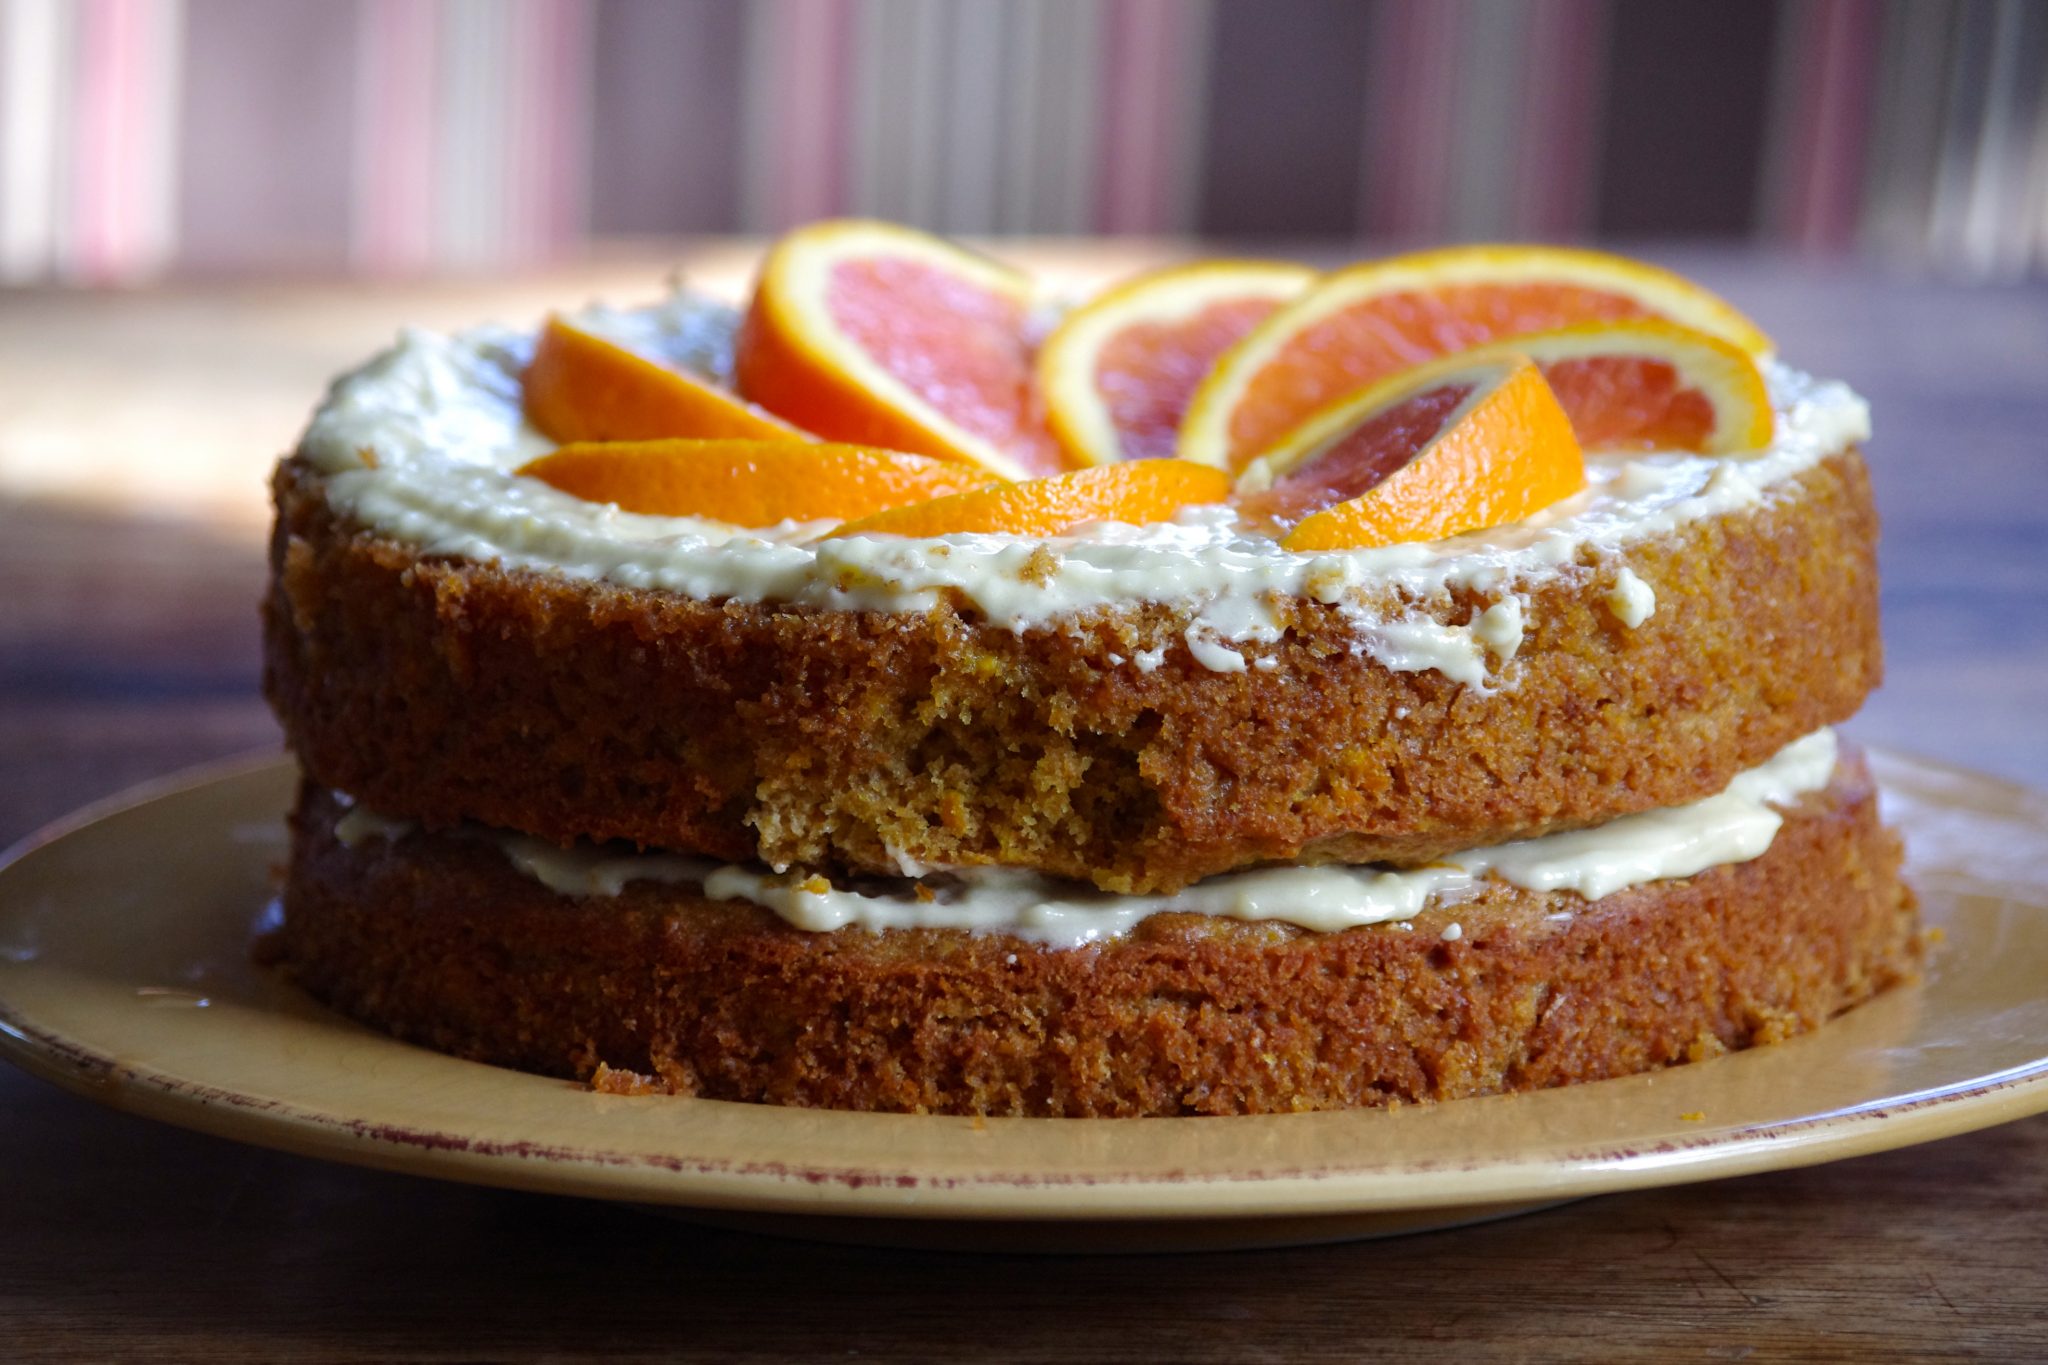 The most delicious agave-sweetened orange cake you've ever tasted, made with whole grain flour